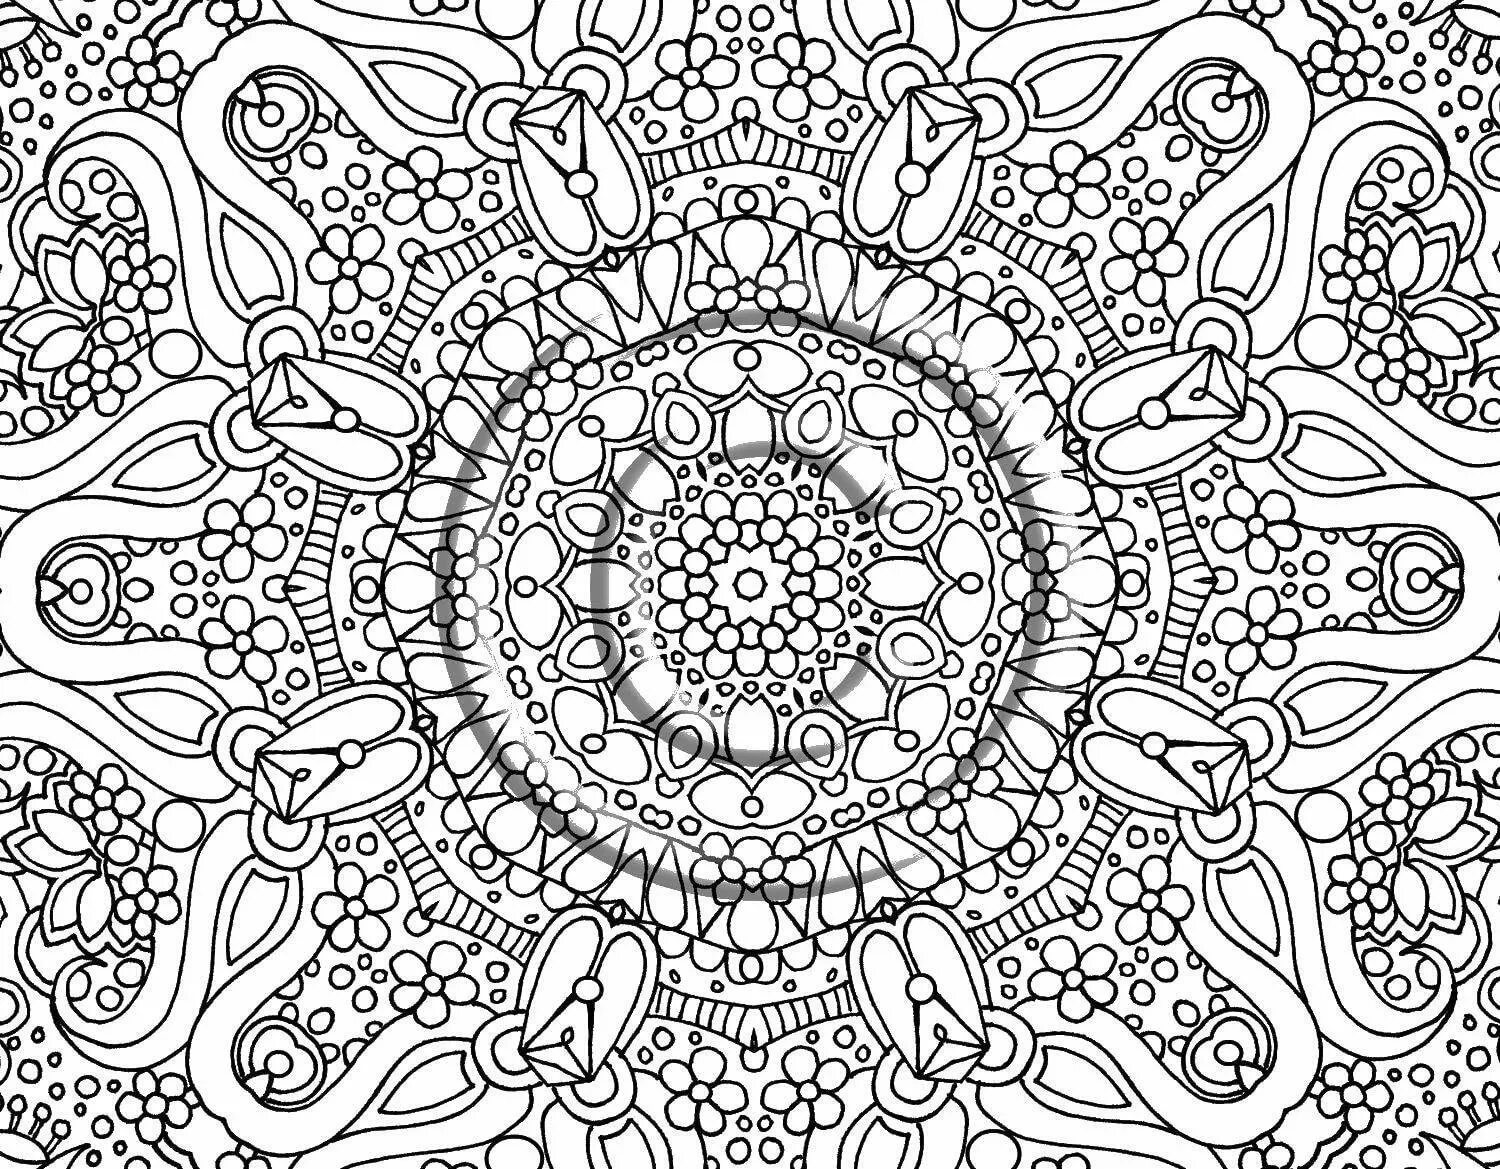 Colouring great anti-stress patterns